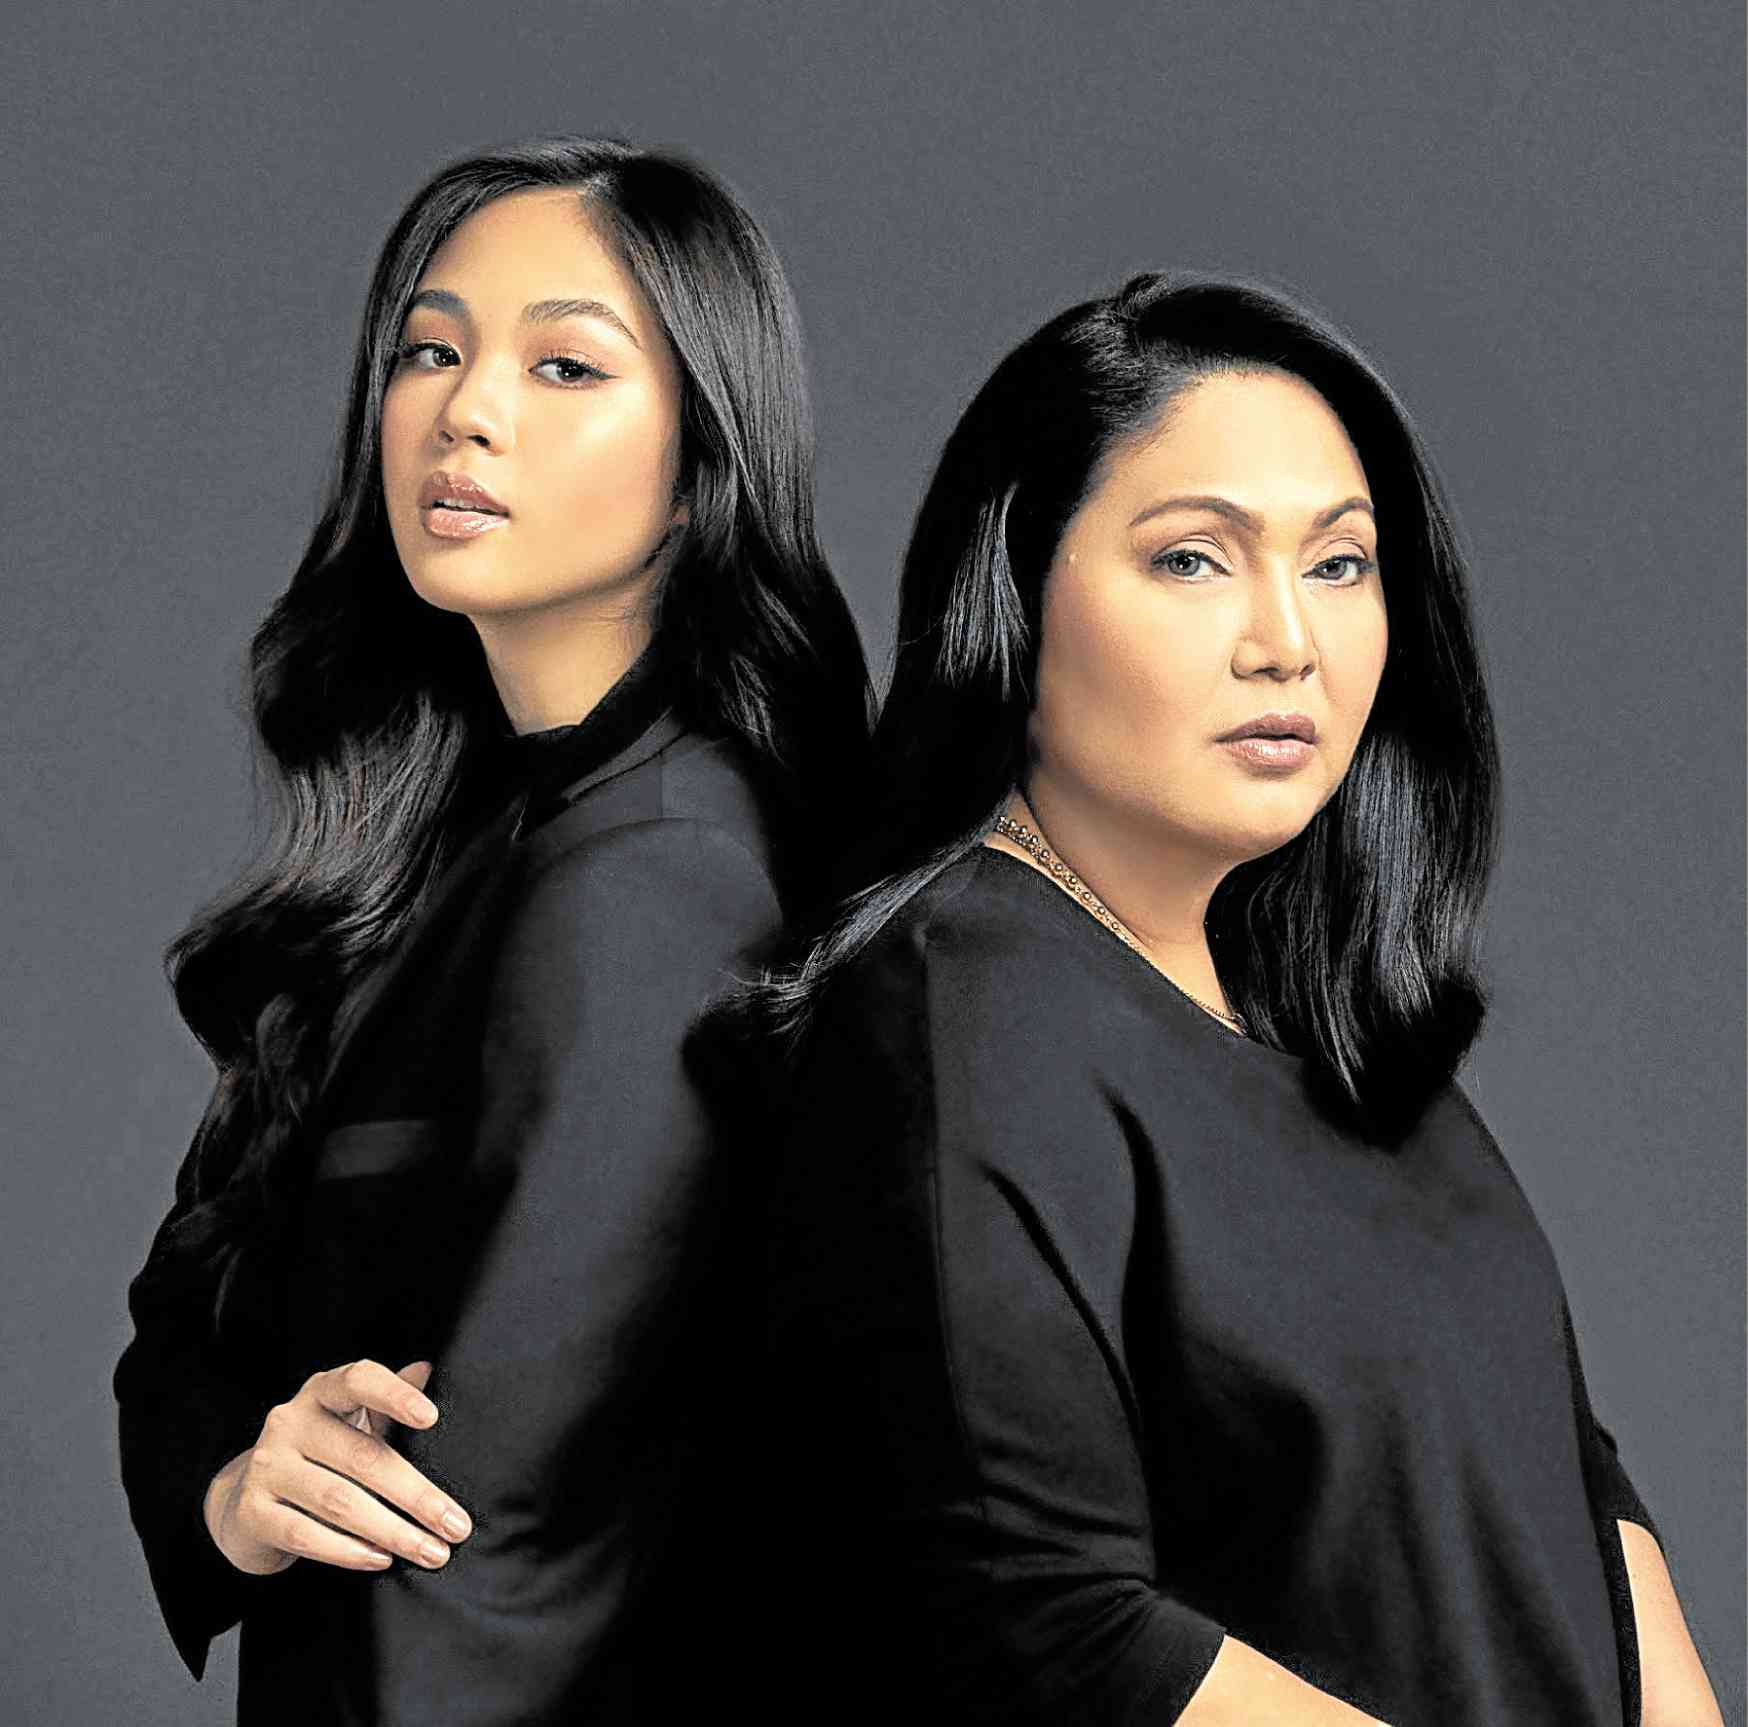 Soriano (right) with “The Heiress” costar Janella Salvador